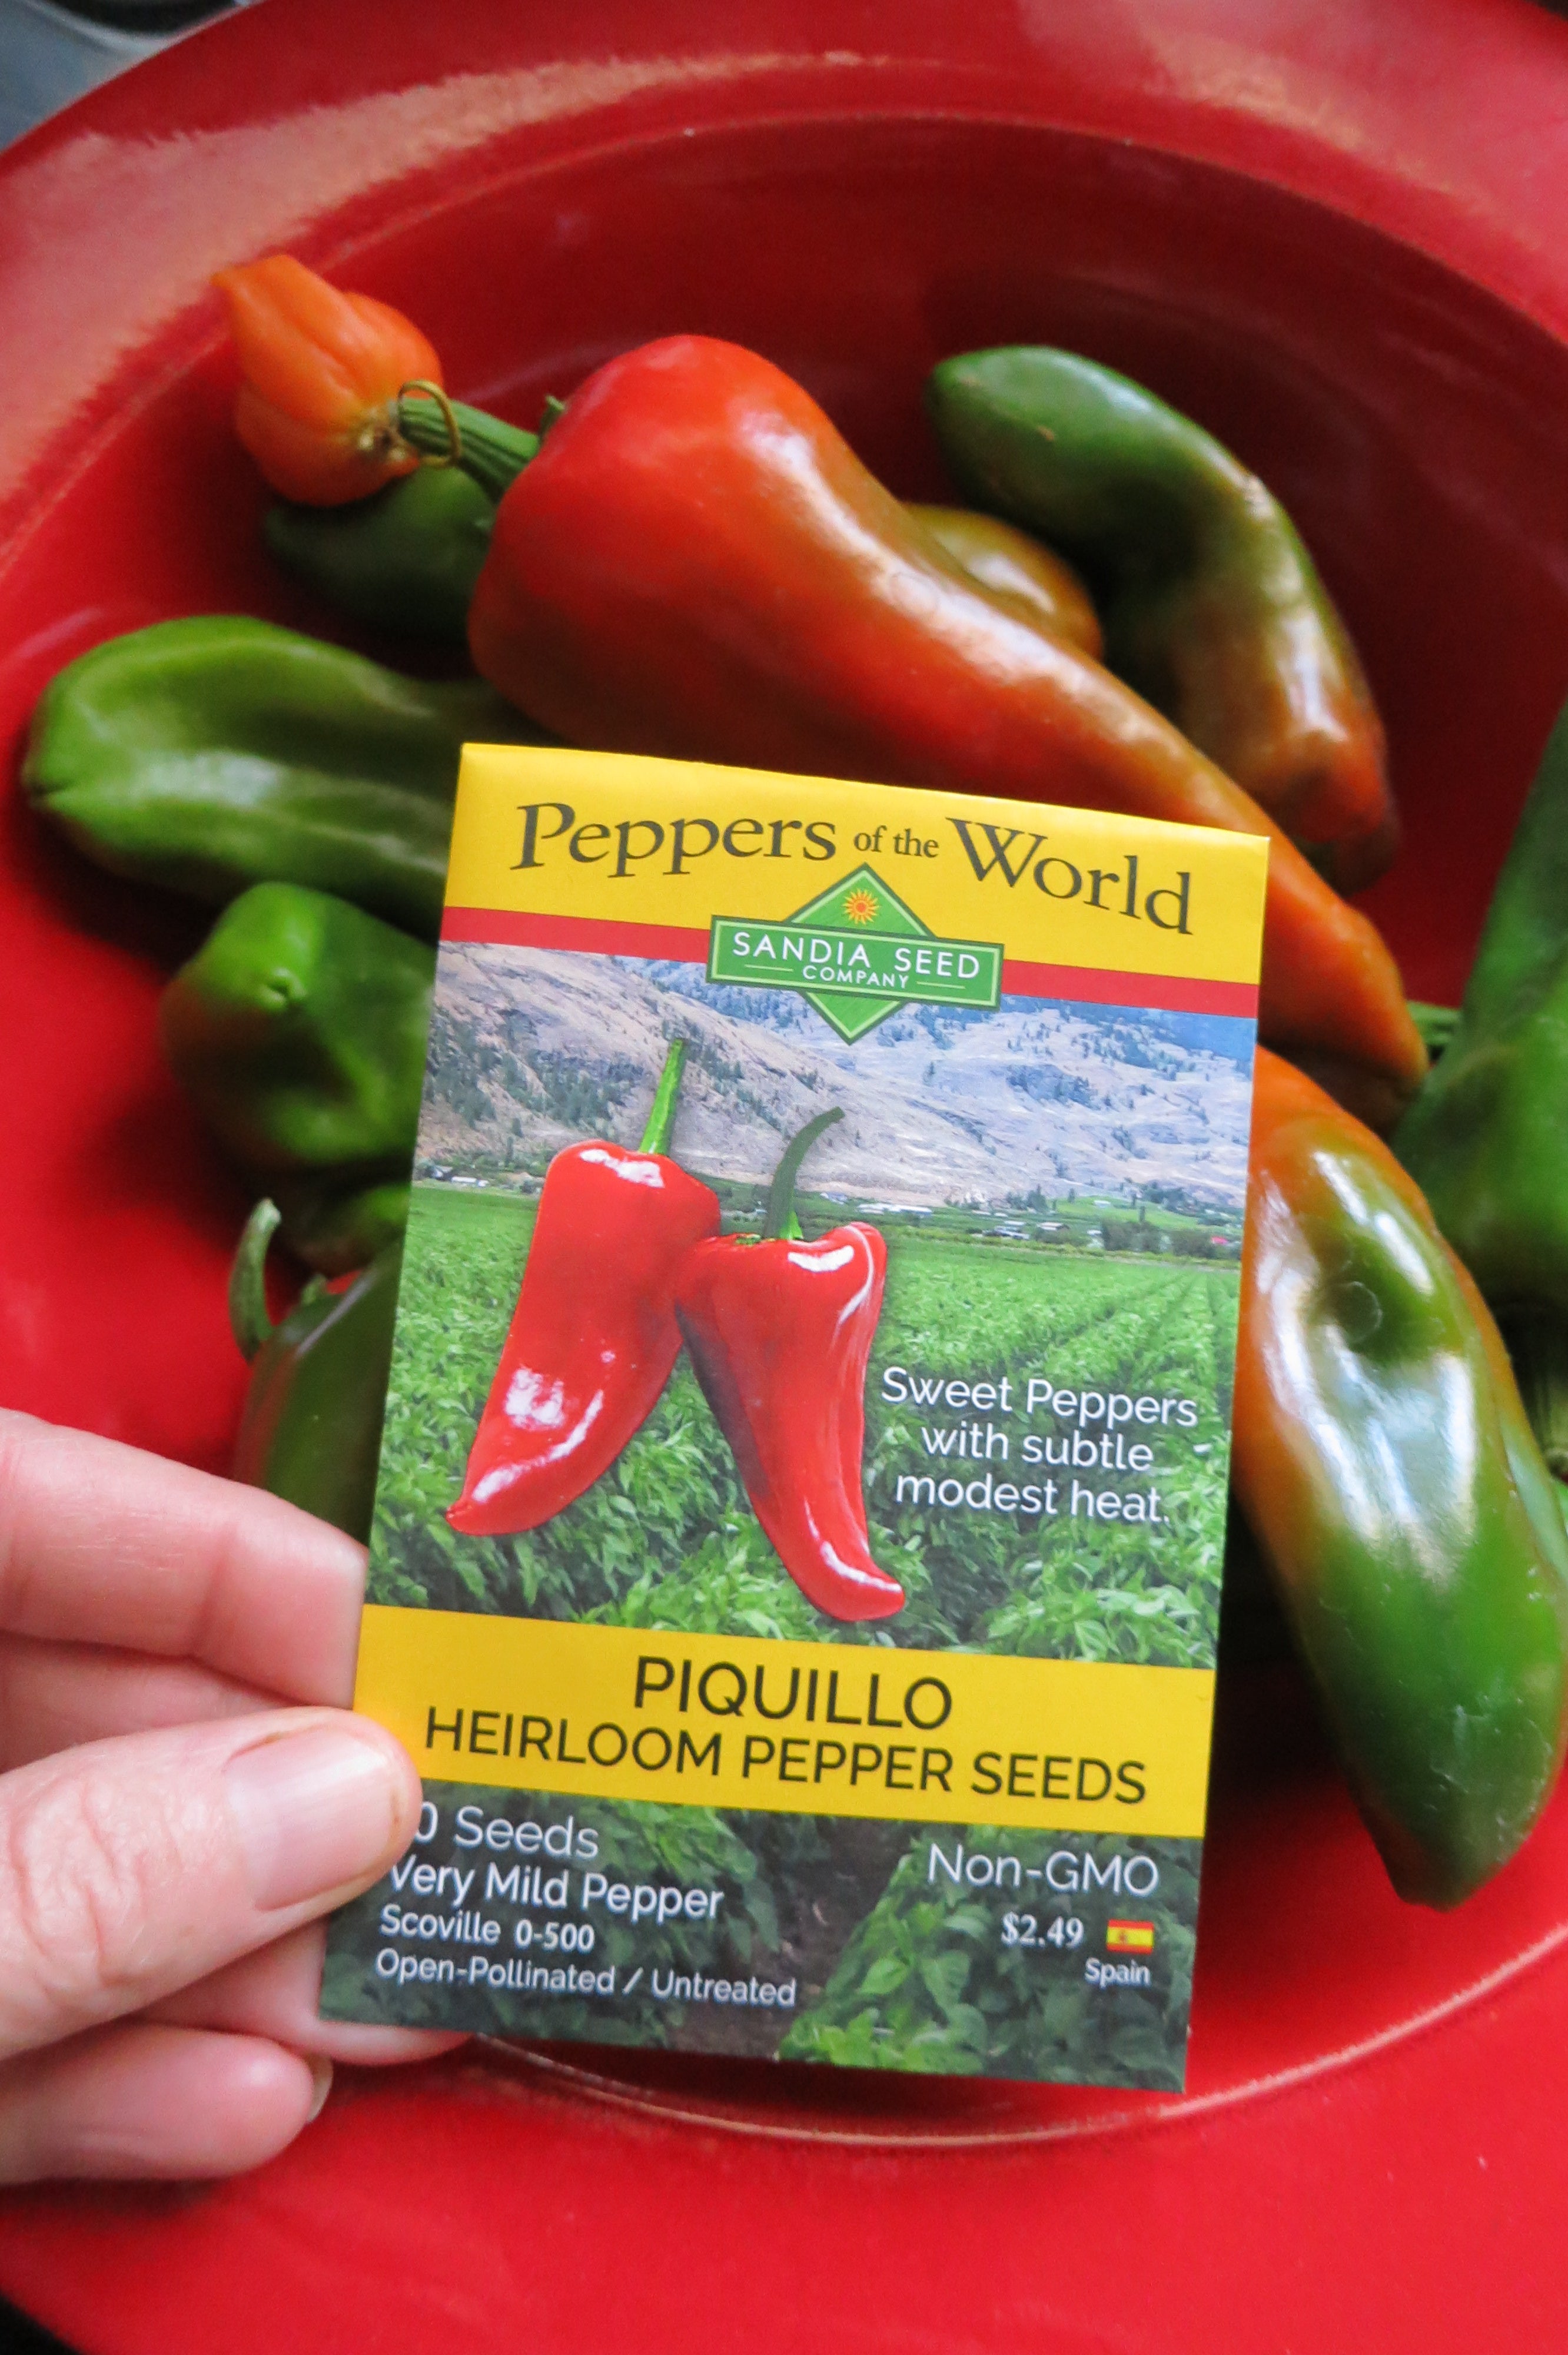 Piquillo Pepper Recipe - grow your own Piquillos!